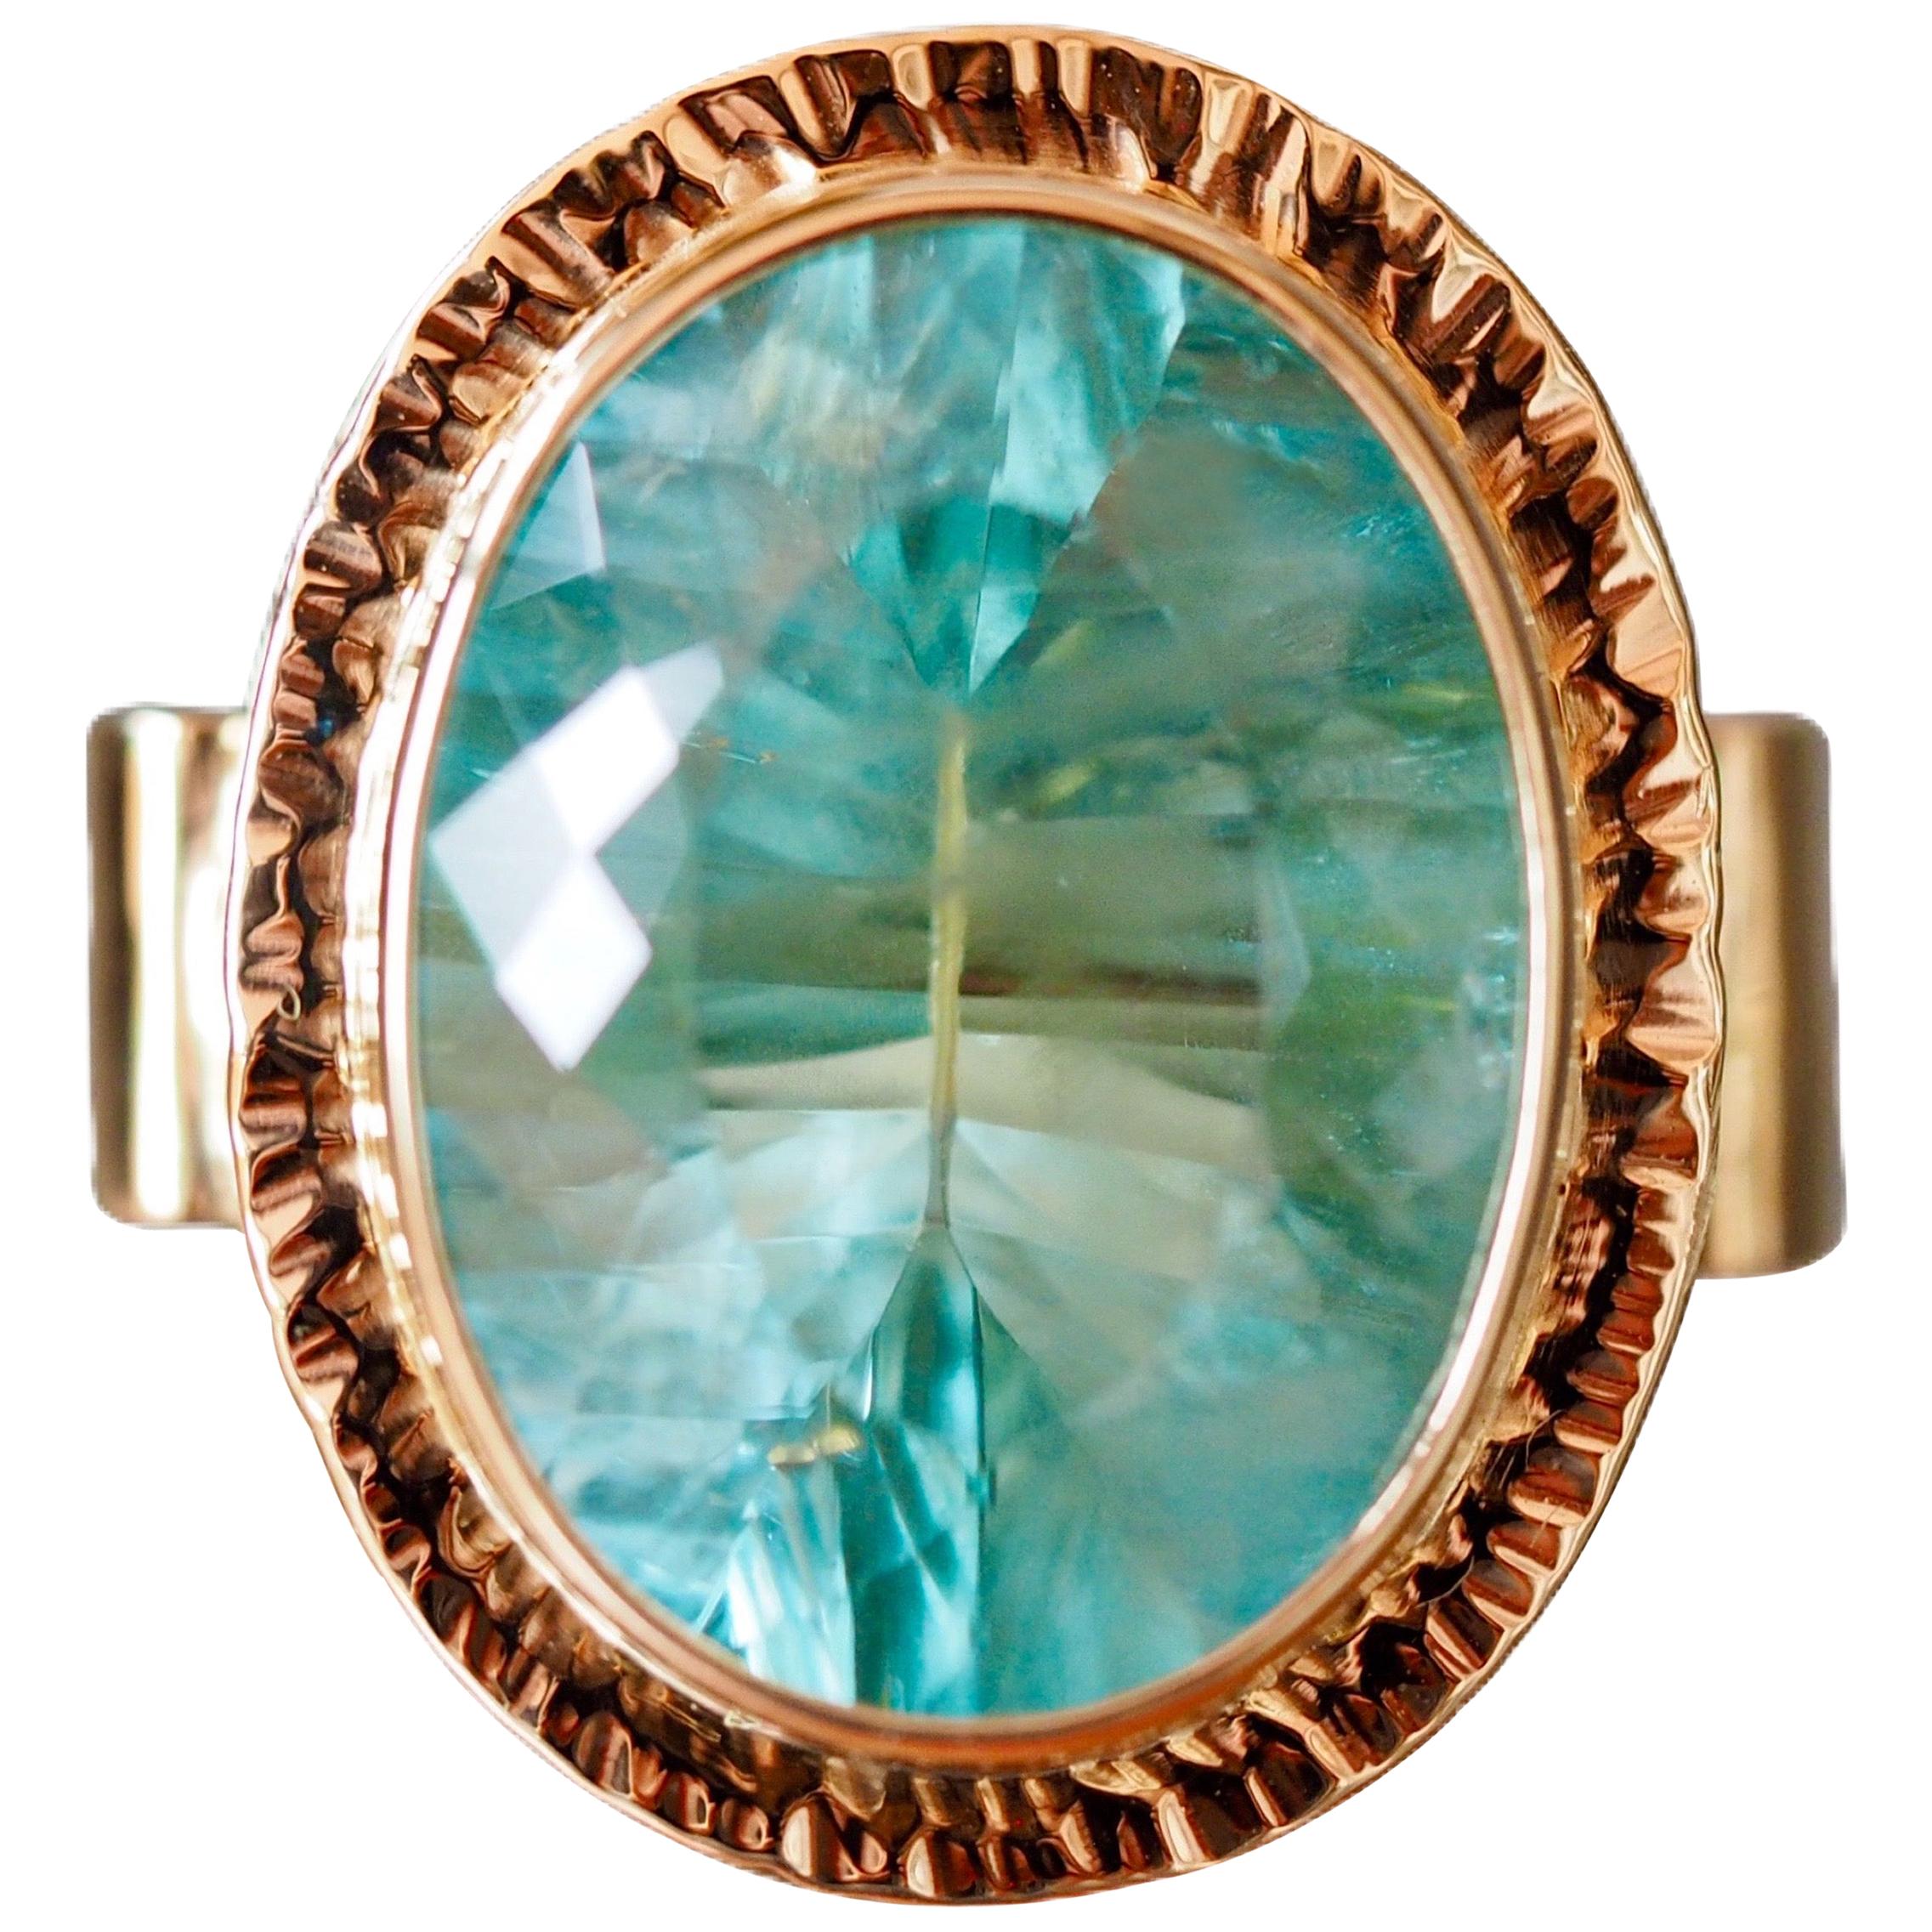 Michael Bakso 25.56 Carat Blue Topaz Statement Ring in Yellow Gold